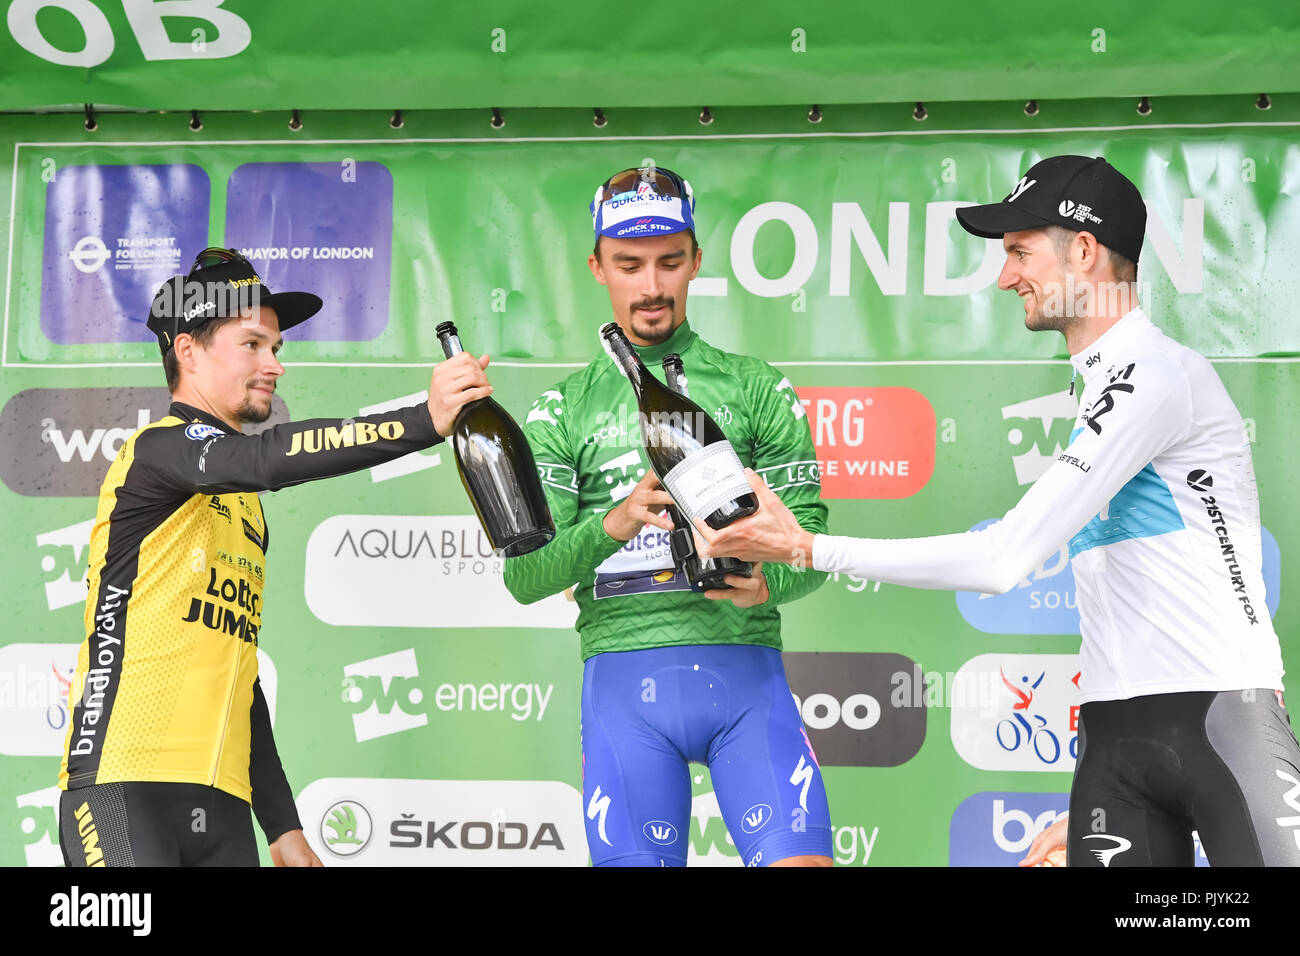 London, UK. 09th Sep, 2018. Julian Alaphilippe (Quick-Step Floors) was crowned the 2018 OVO Energy Tour of Britain as Team Sky's Wout Poels won the 2nd and Team Lotto NL - Jumbo's Primoz Roglic in 3rd place on final stage are celebrating after the final race during 2018 OVO Energy Tour of Britain - Stage Eight: The London Stage on Sunday, September 09, 2018, LONDON ENGLAND: Credit: Taka Wu/Alamy Live News Stock Photo